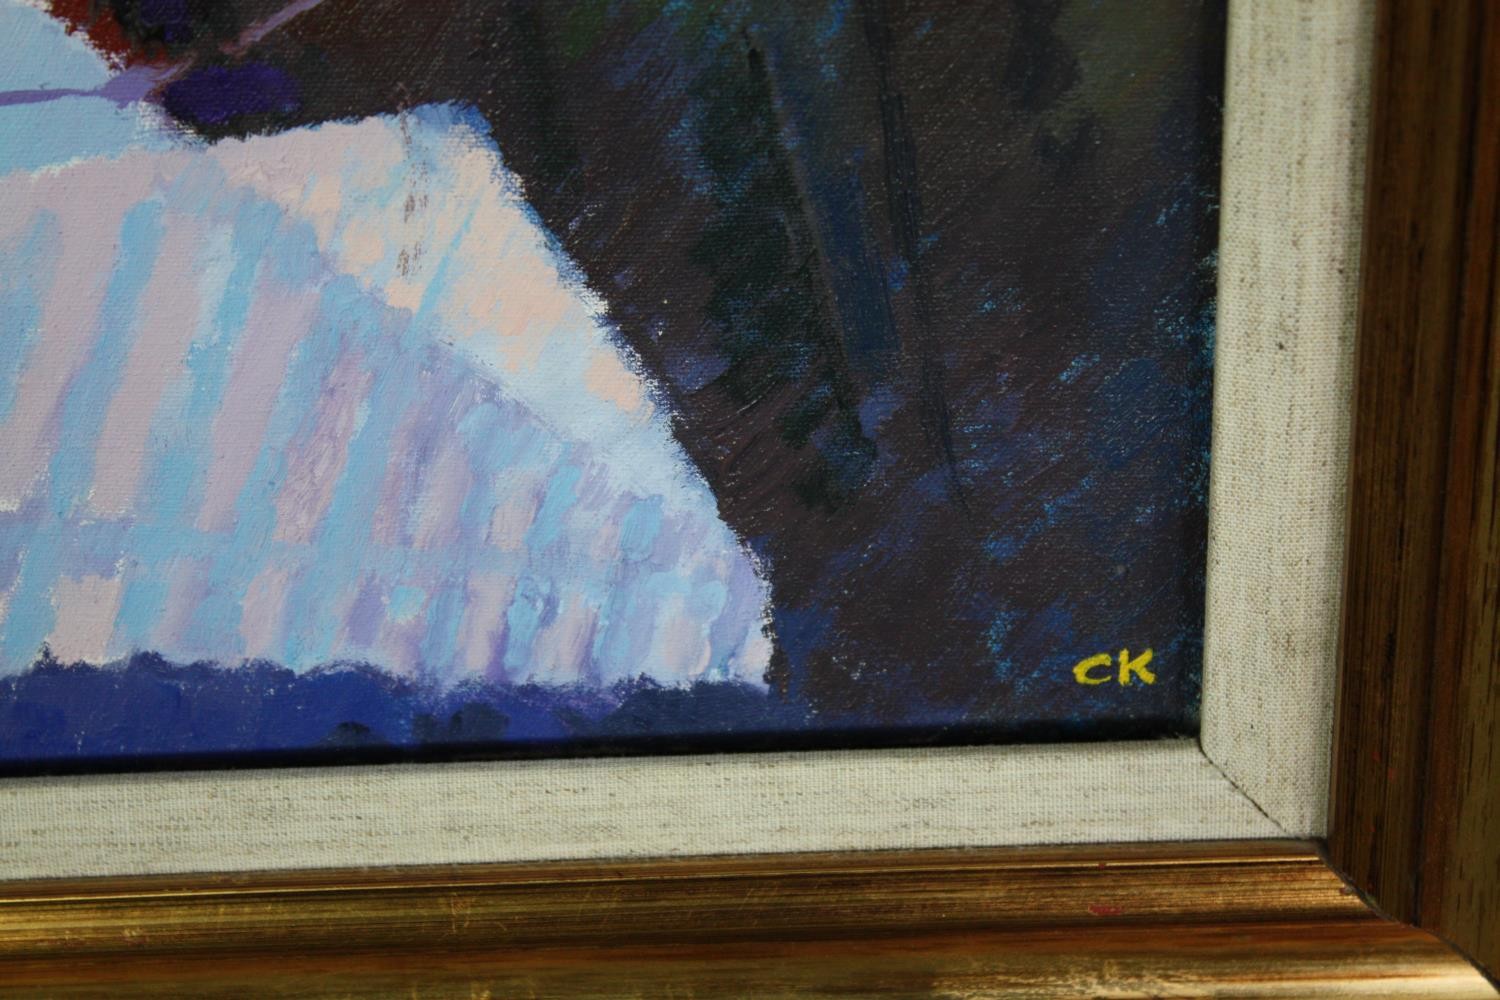 Oil on canvas, Urban snow scene, initialled CK, gallery label to the reverse, "Thaw", C Keays. H. - Image 3 of 5